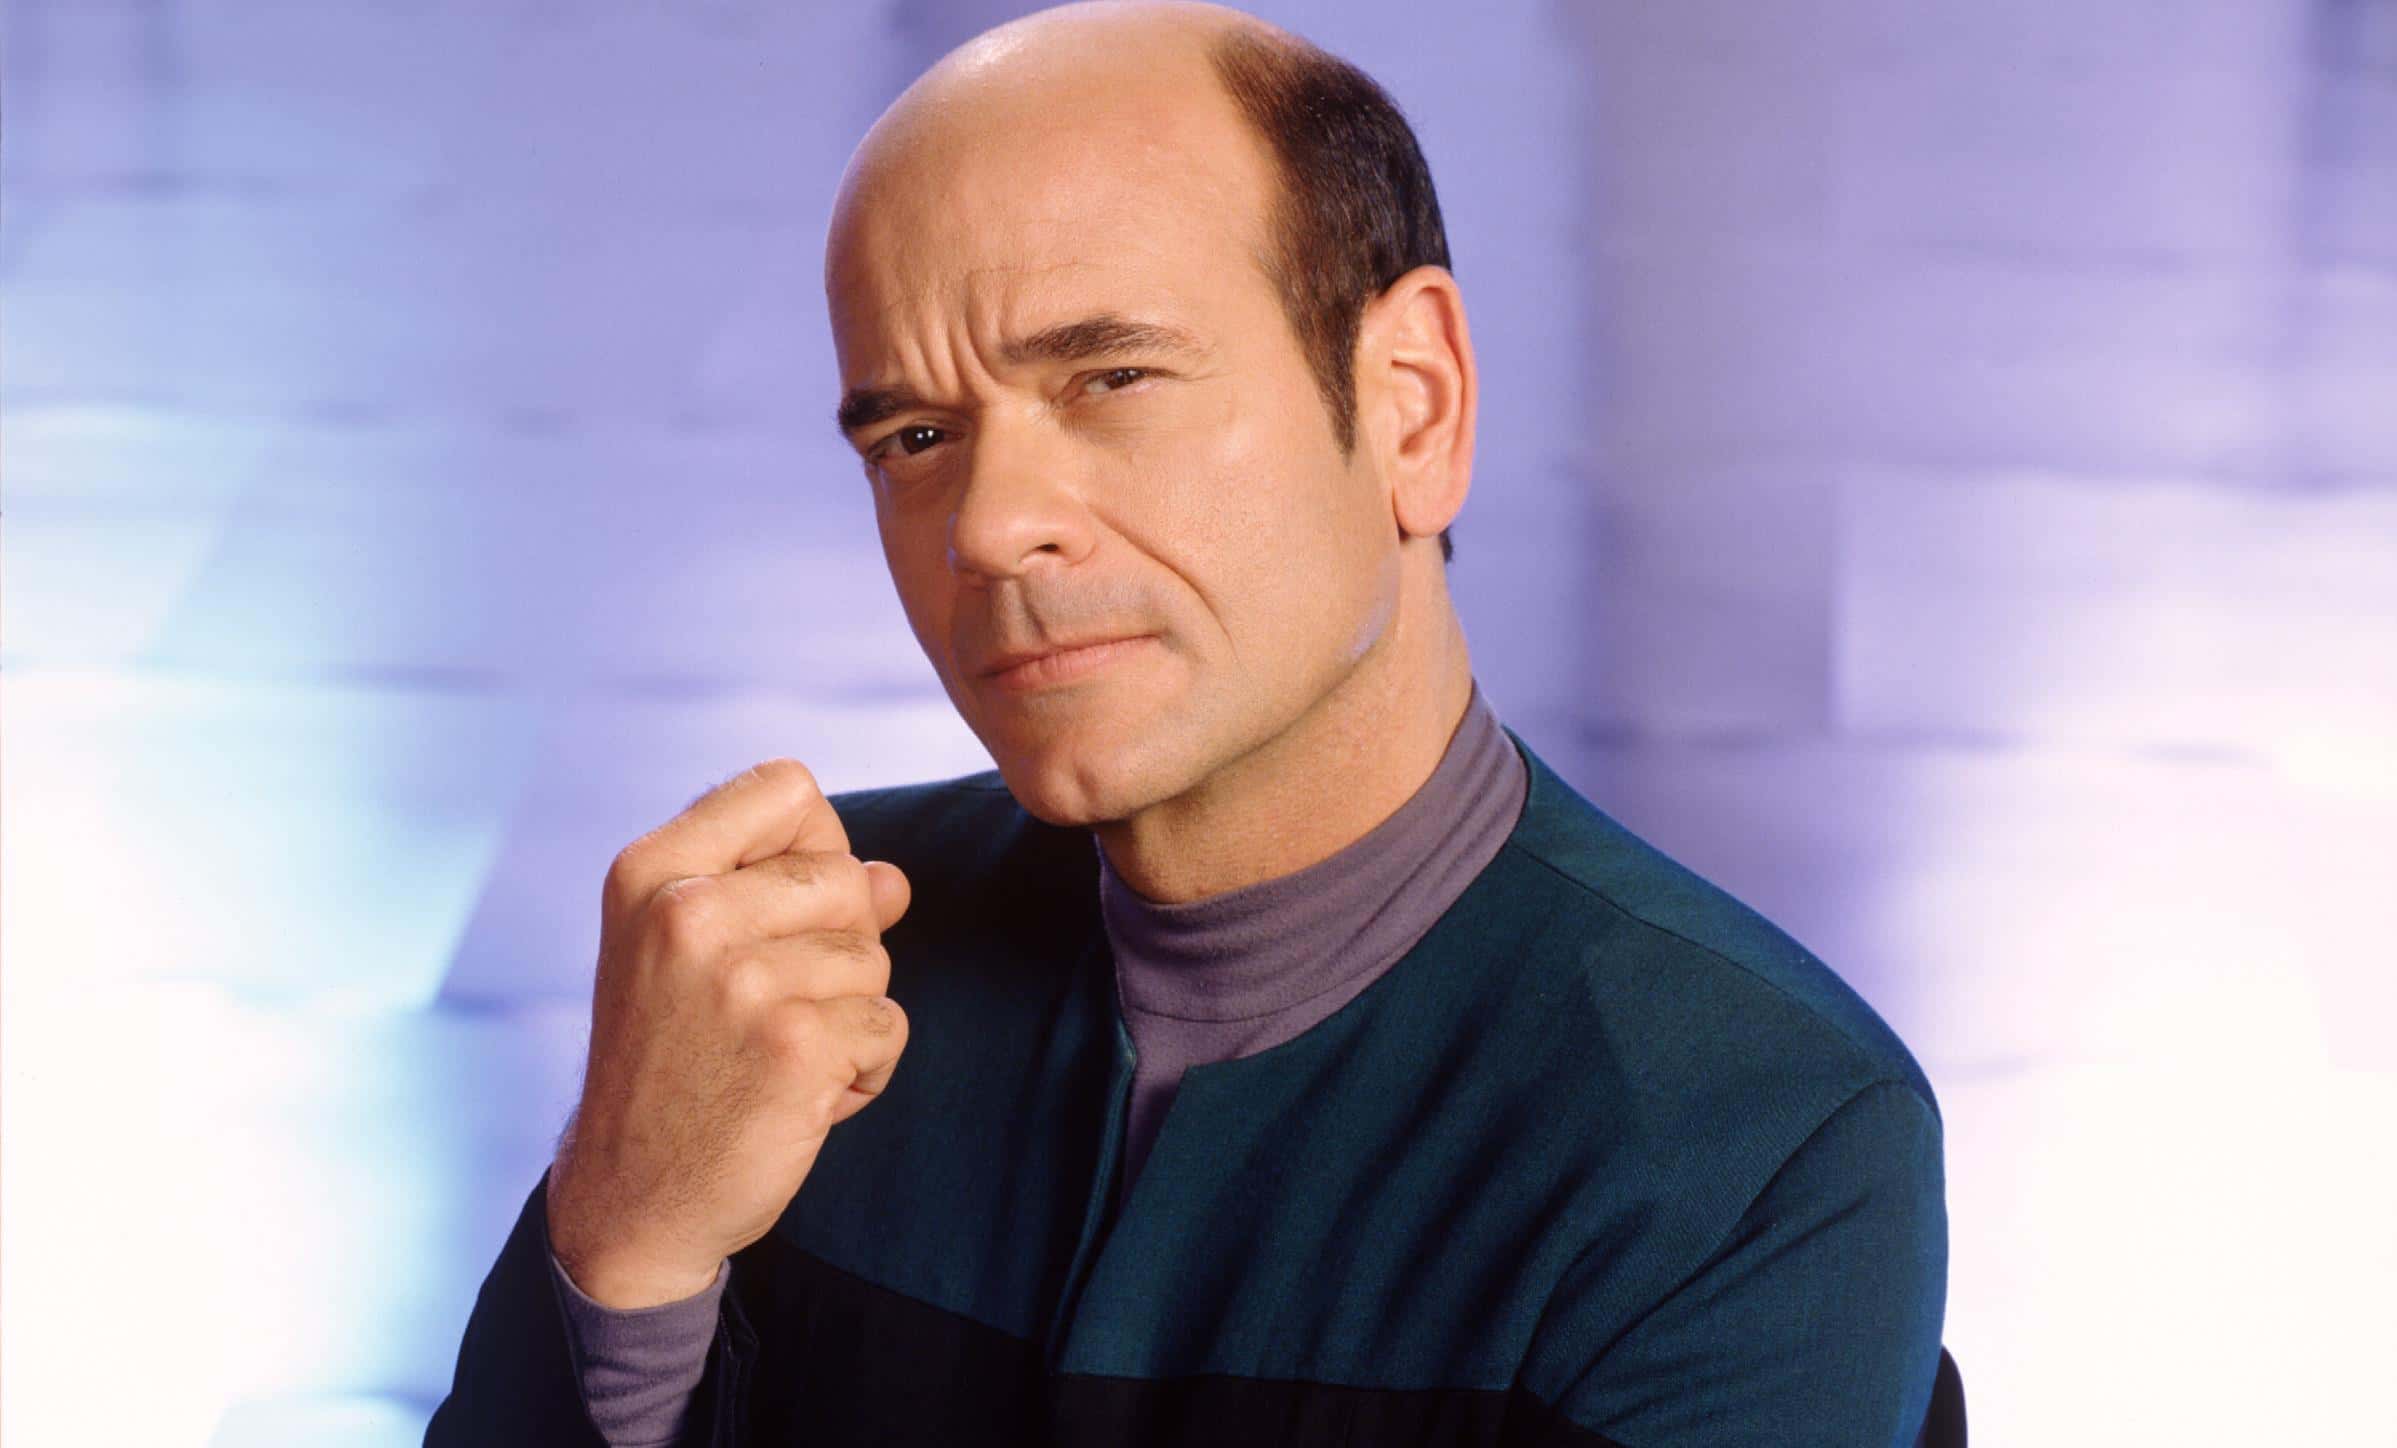 <p>When Robert Picardo auditioned for the role of the holographic Doctor on <em>Star Trek: Voyager</em>, he was asked to say the line, "Somebody forgot to turn off my program". He did, but then ad-libbed a line that ended up getting him the part, saying "I’m a doctor, not a light bulb".</p>